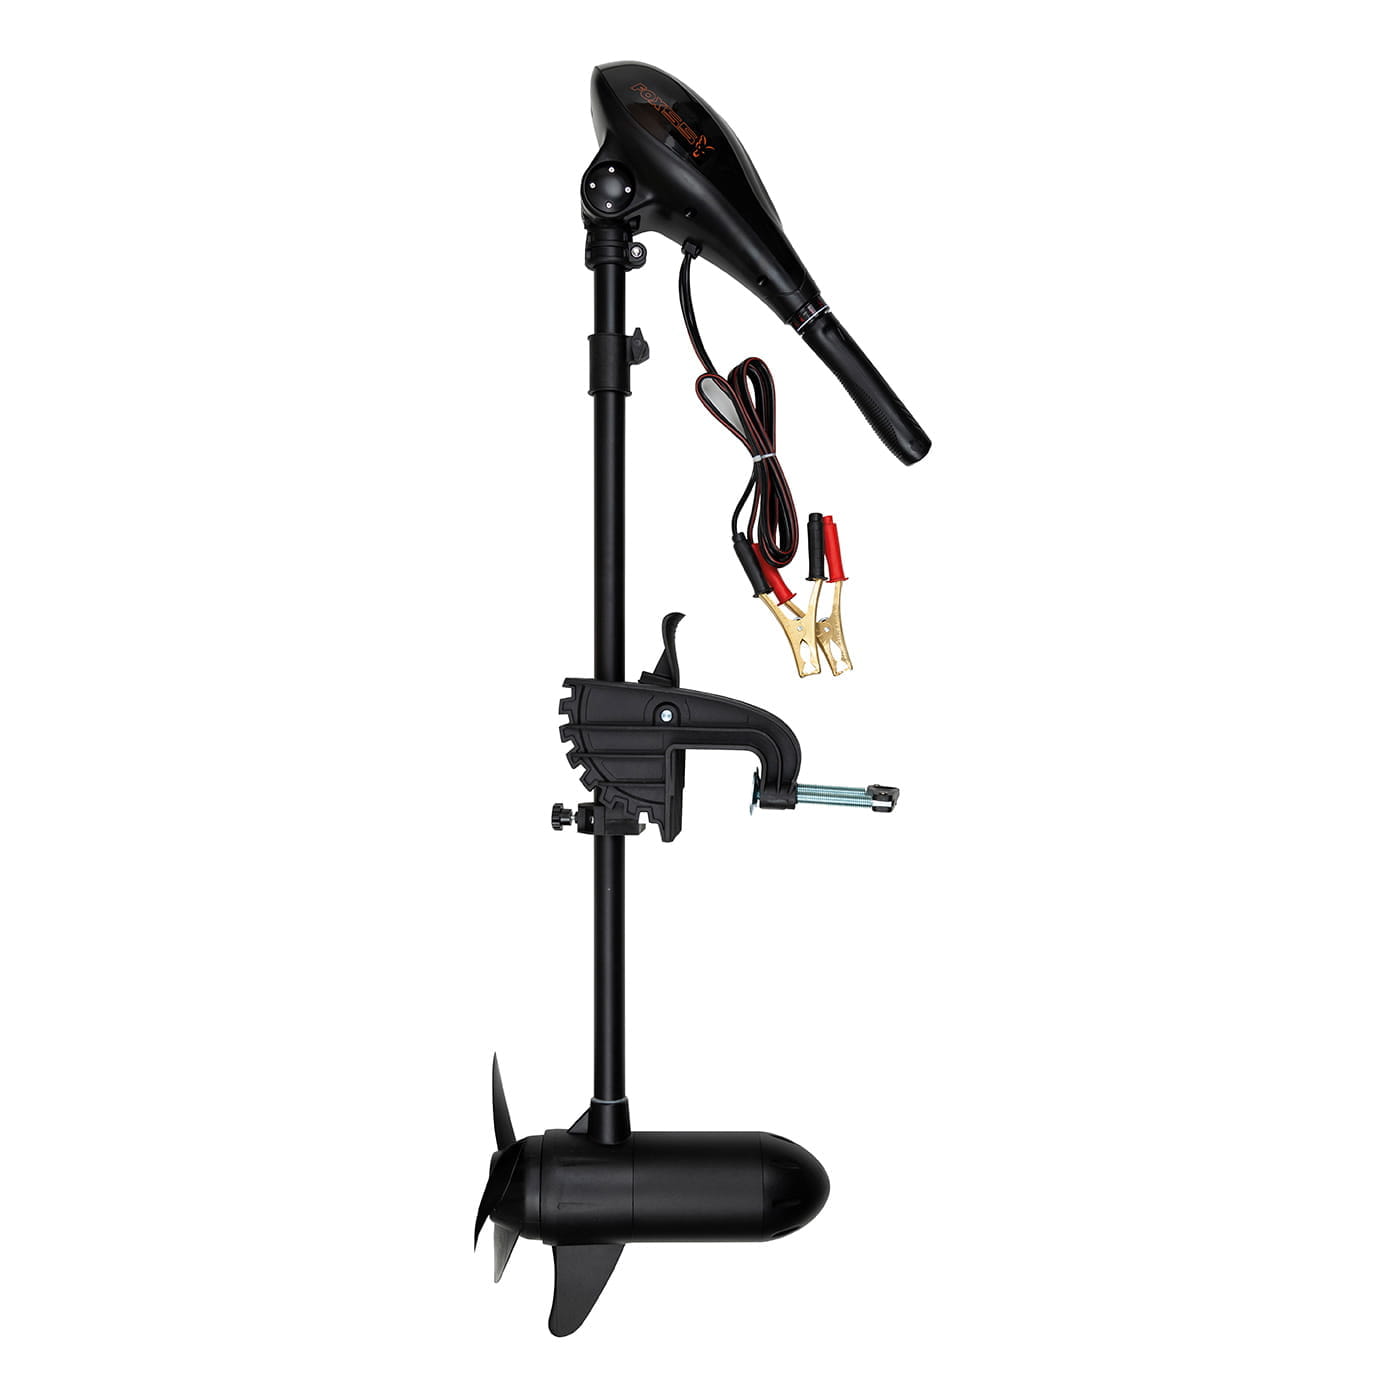 Fox Electric Outboard Motor 55lbs mit Batterieanzeige